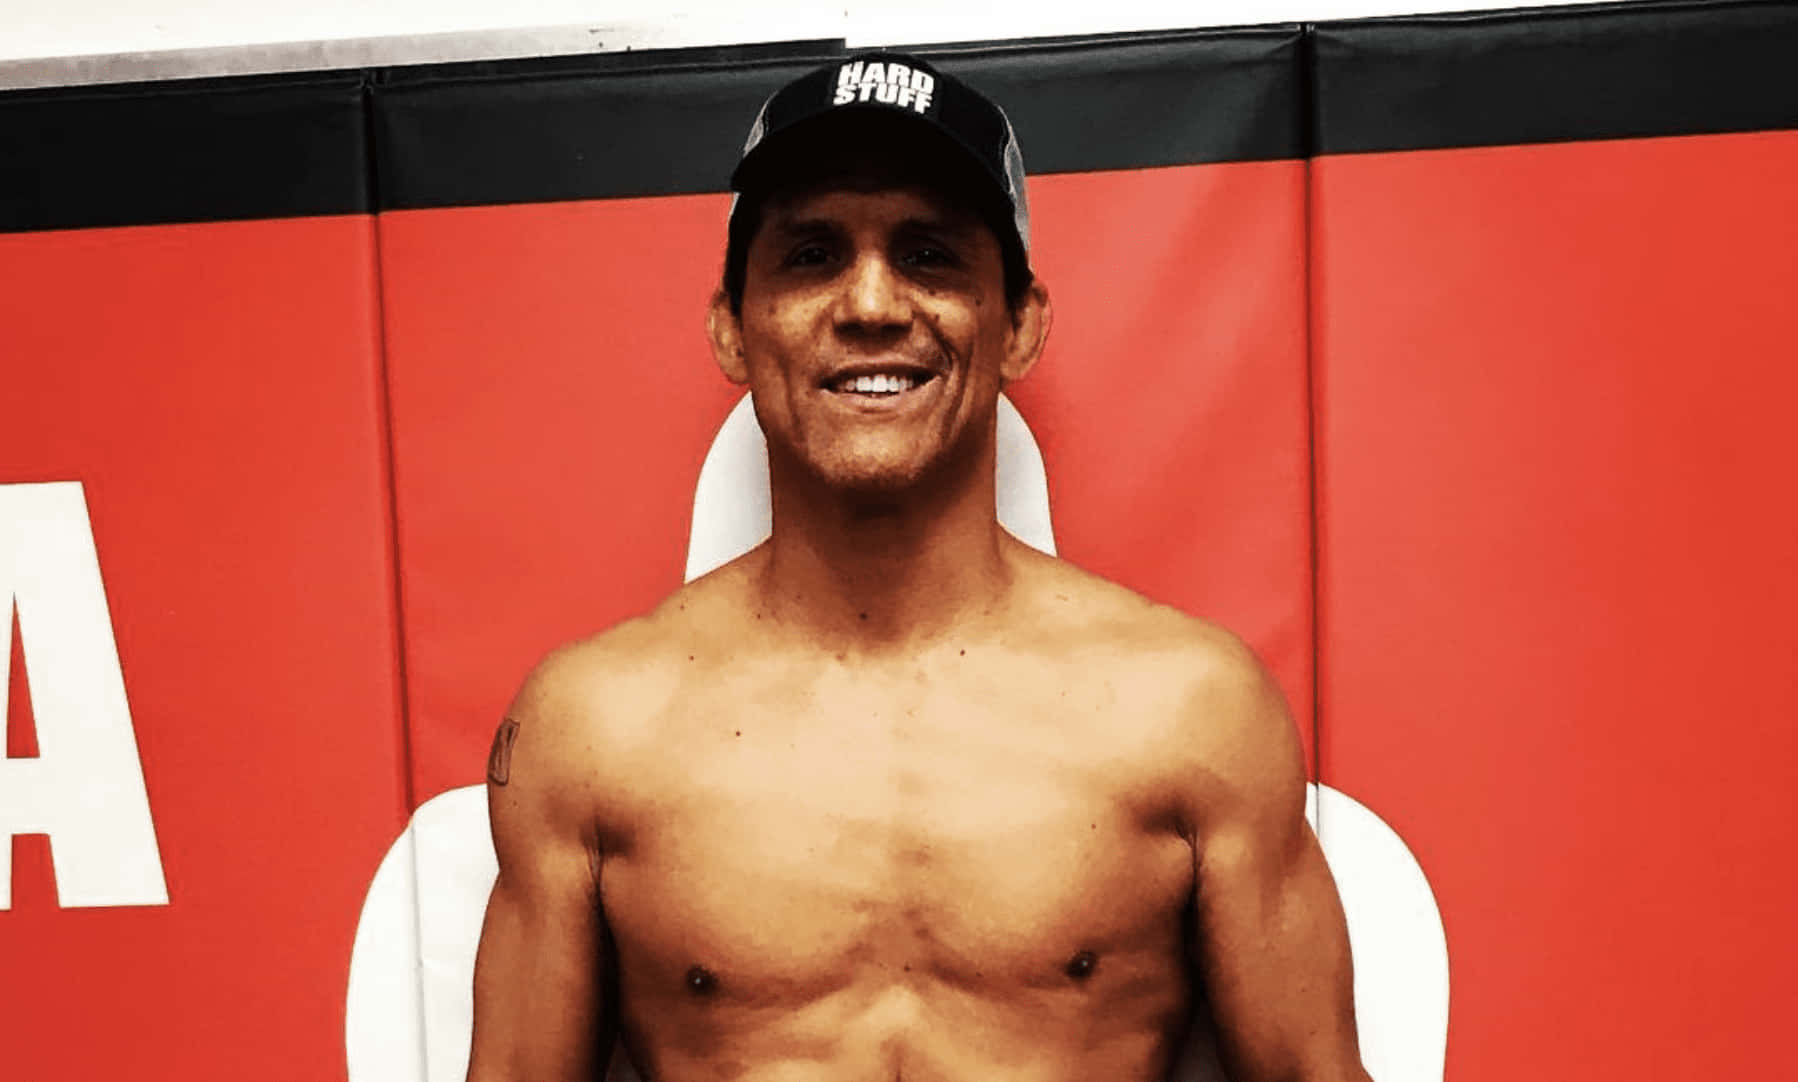 Frank Shamrock Lean And Muscular Body Background